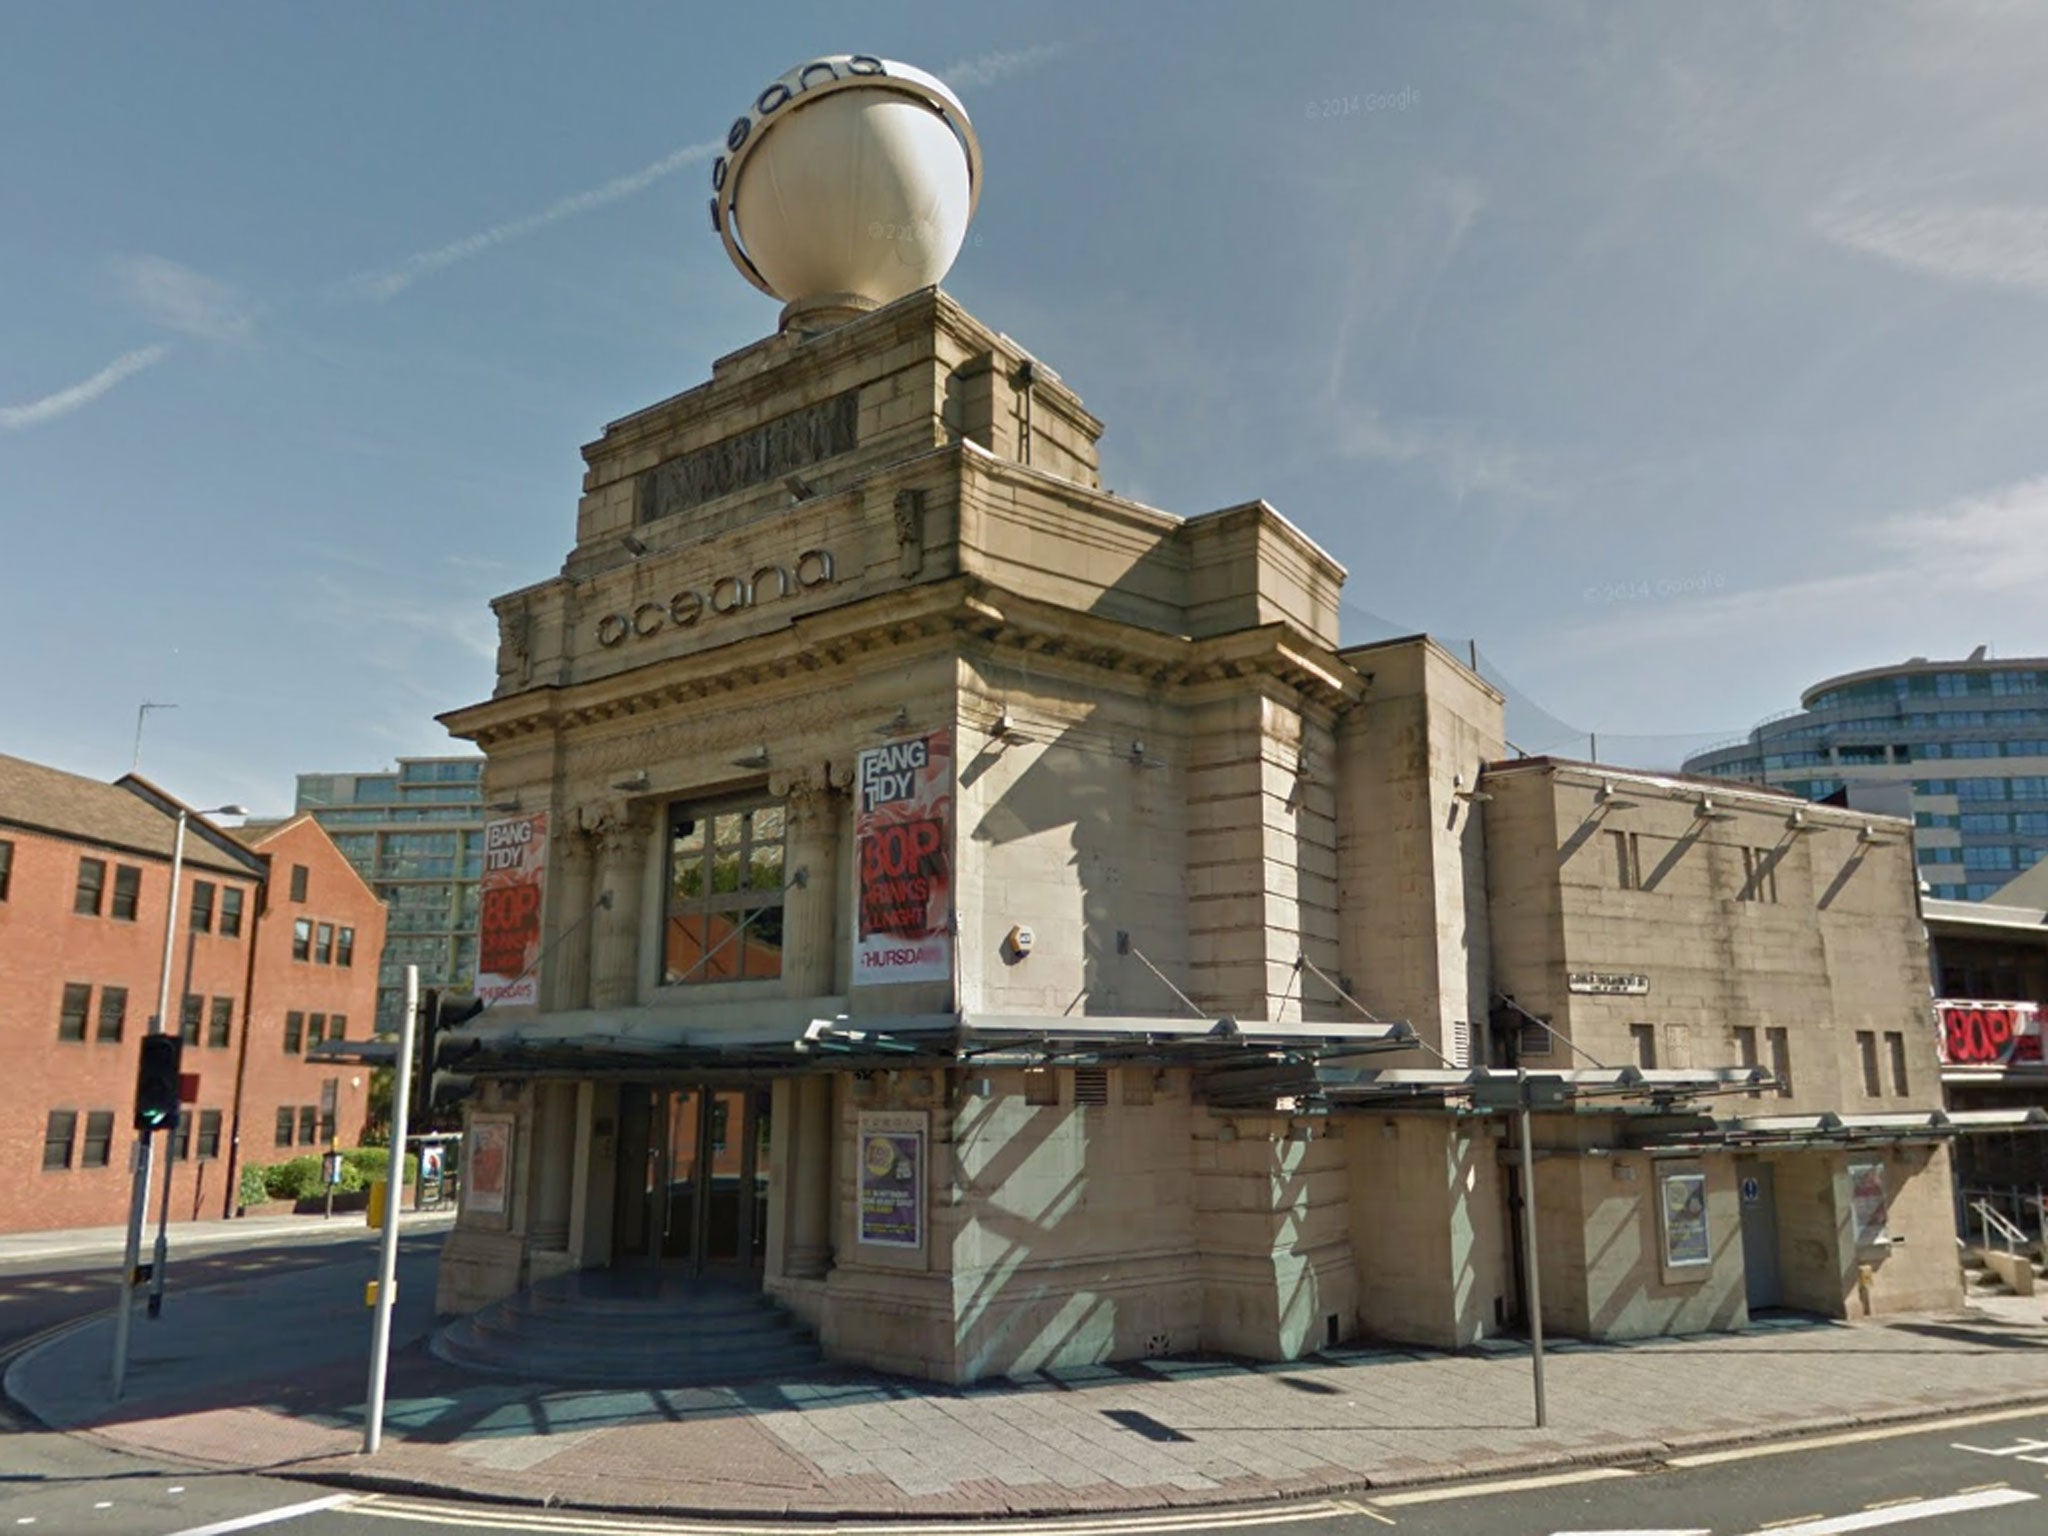 Jongleurs, at Oceana, in Nottingham, apologised after maggots fell out of the air-conditioning